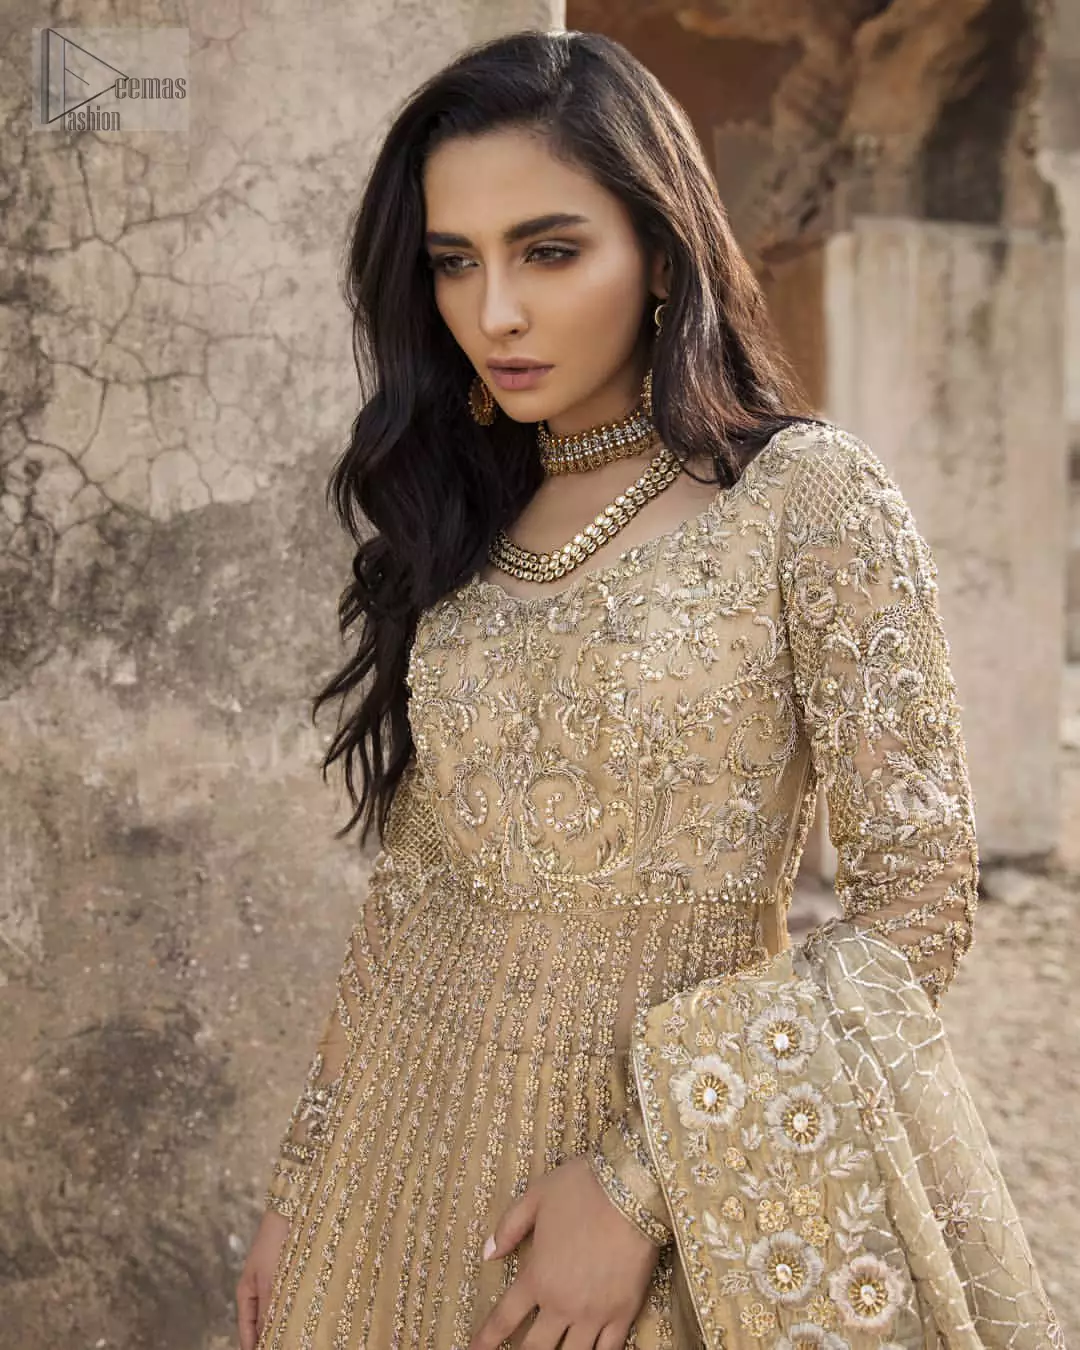 Captured in traditional silhouette, The bridal stands out due to its uniqueness and the perfect fusion of modern cut and traditional embroidery. It is highlighted with kora, dabka, tilla, sequins and pearls. Pishwas is enhanced with zardosi work on bodice, vertical lines and the daaman is emphasized with intricate zardosi details that gives perfect ending to this outfit. A handcrafted pale gold lehenga finished with thick embellished borders completes the look. The outfit is coordinated with chiffon dupatta with hand embroidered borders on all four sides and geometric patterns on the ground.